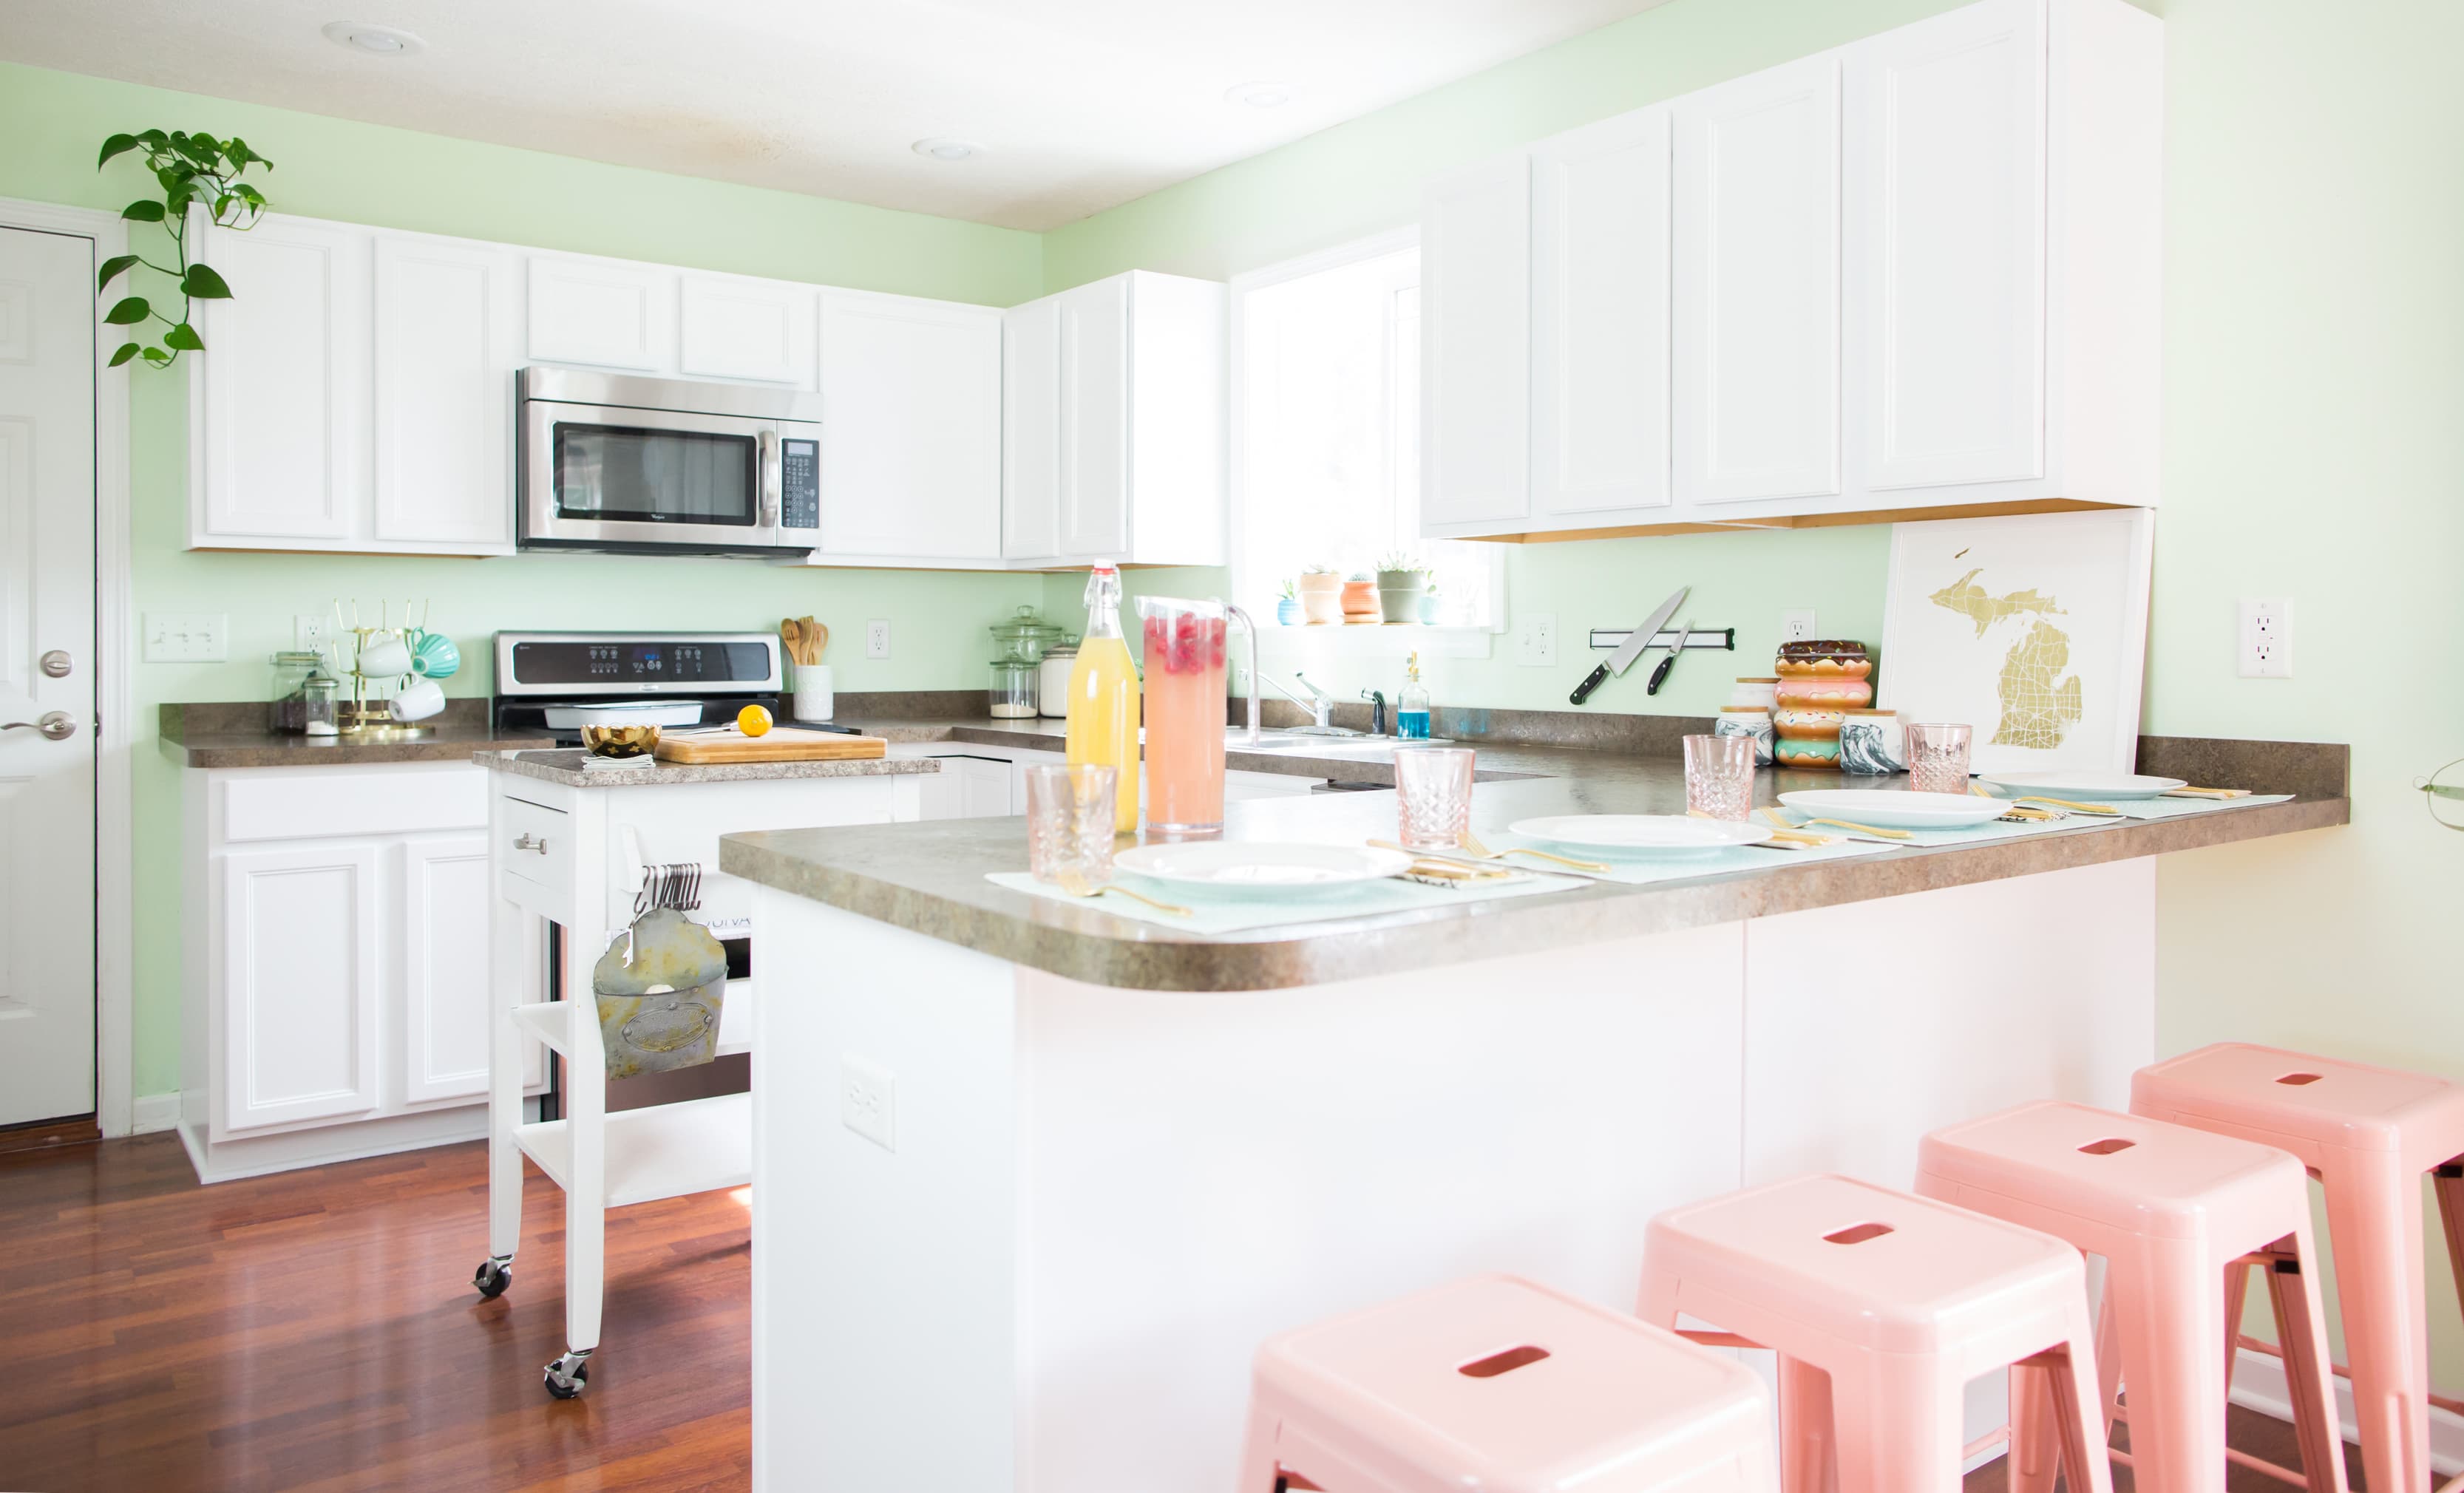 How To Paint Wood Kitchen Cabinets With White Paint Kitchn